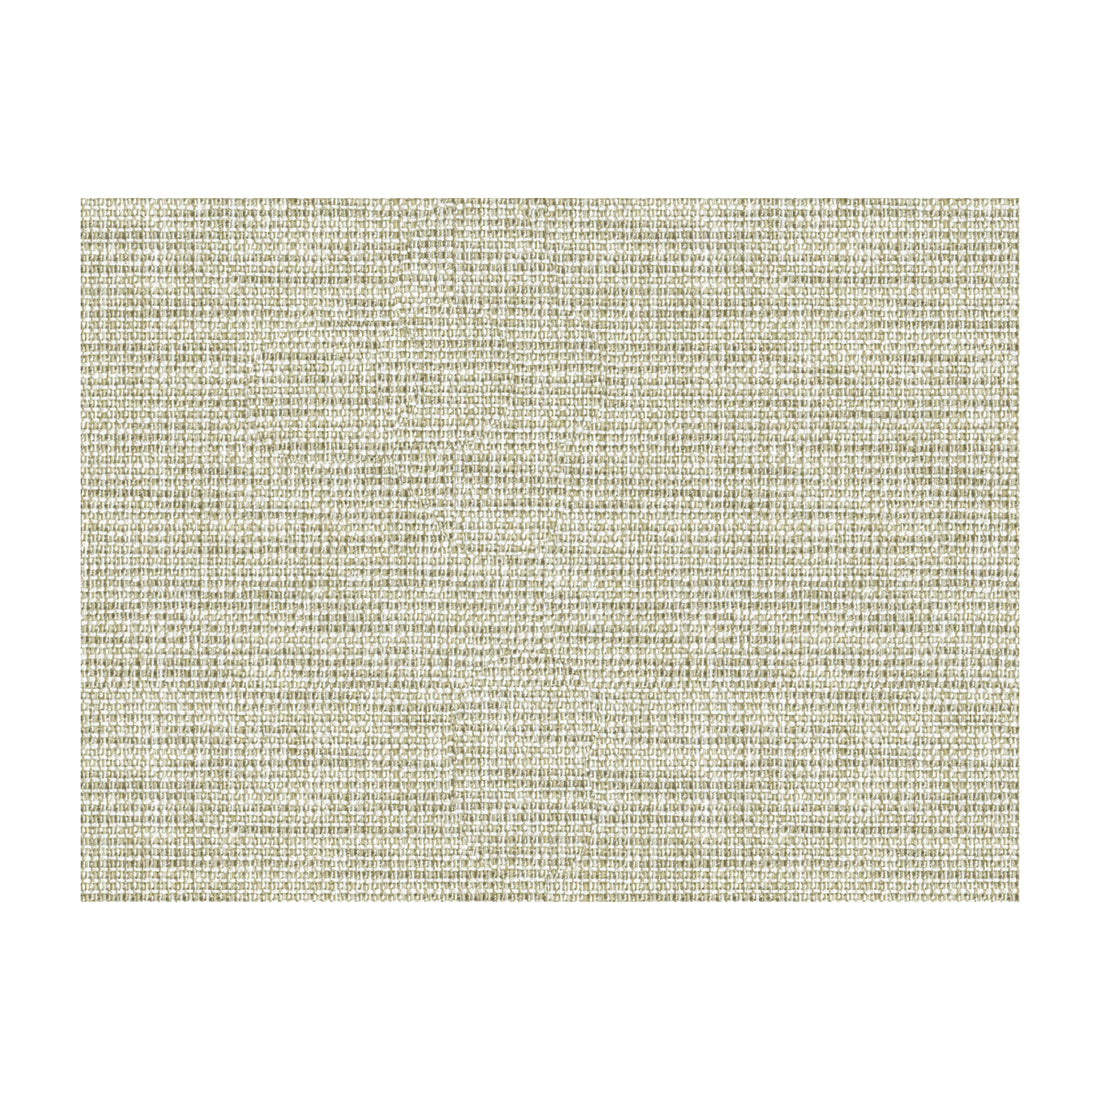 Standford fabric in pewter color - pattern 33406.1611.0 - by Kravet Basics in the Jeffrey Alan Marks Waterside collection